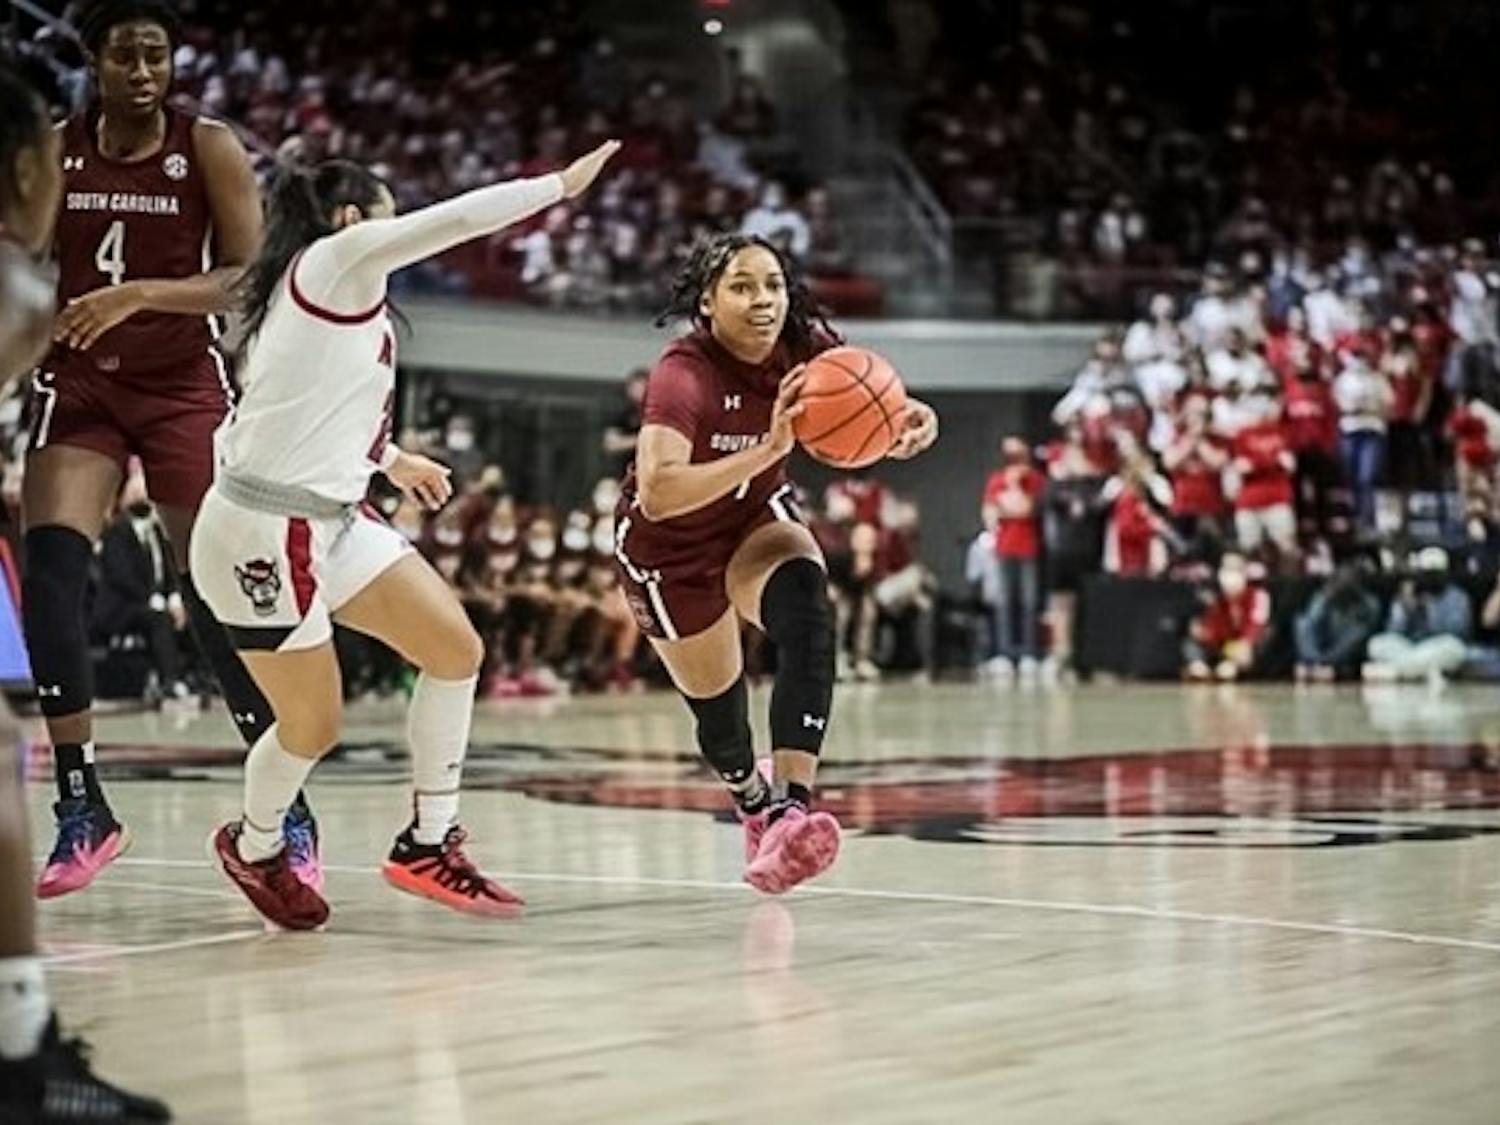 Junior guard Zia Cooke taking the ball down the court. Cooke scored 17 points against NC State on Nov. 9, 2021.